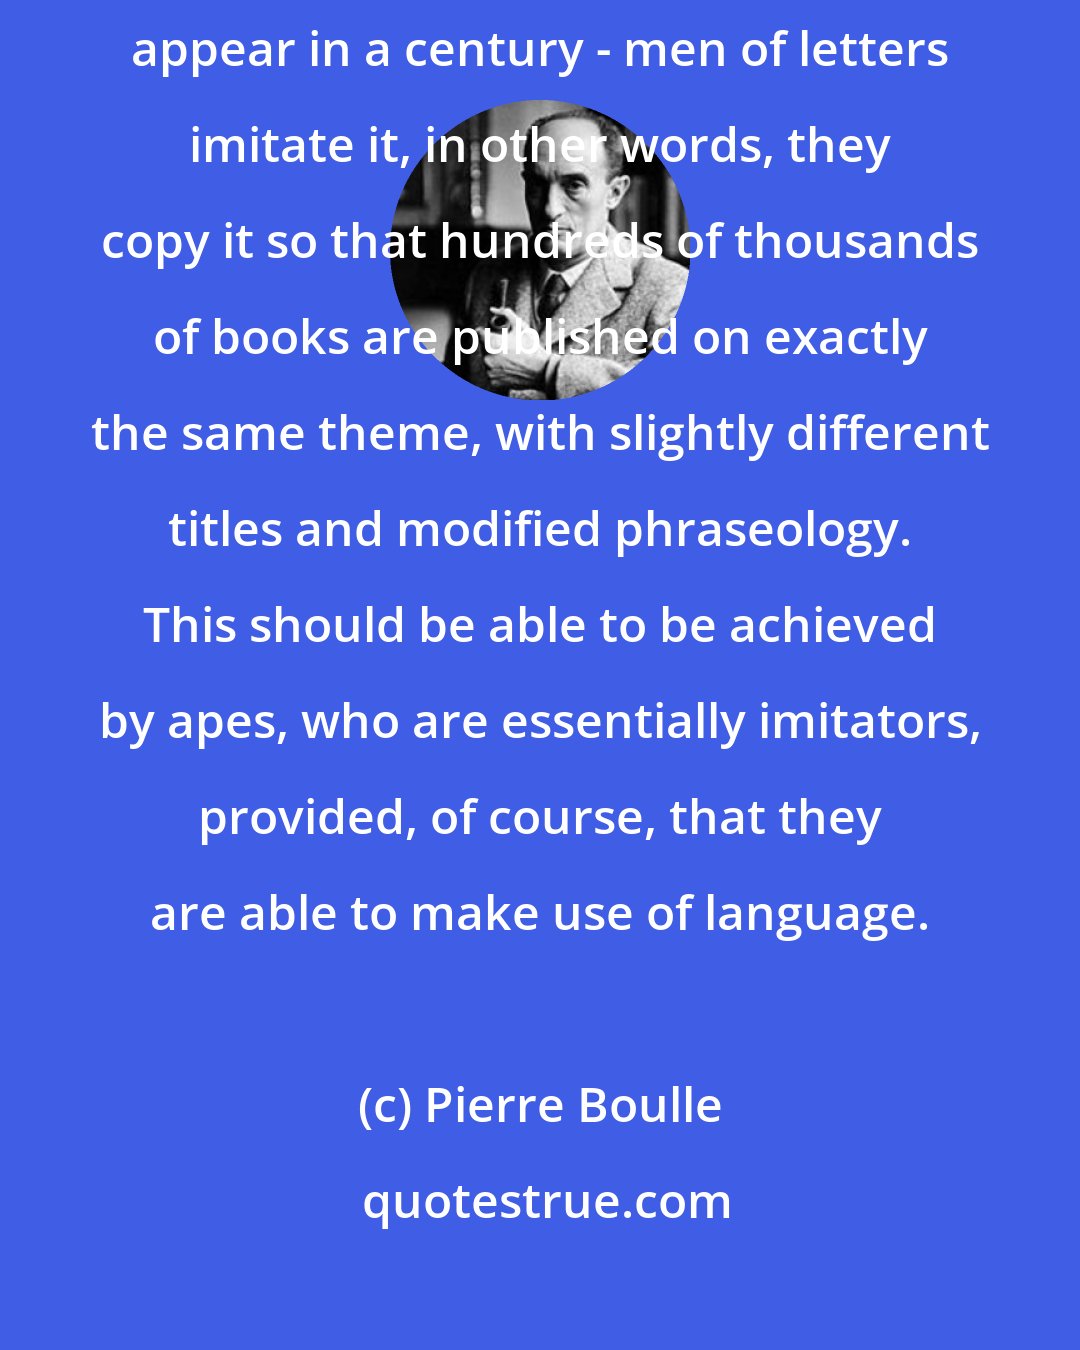 Pierre Boulle: But once an original book has been written - and no more than one or two appear in a century - men of letters imitate it, in other words, they copy it so that hundreds of thousands of books are published on exactly the same theme, with slightly different titles and modified phraseology. This should be able to be achieved by apes, who are essentially imitators, provided, of course, that they are able to make use of language.